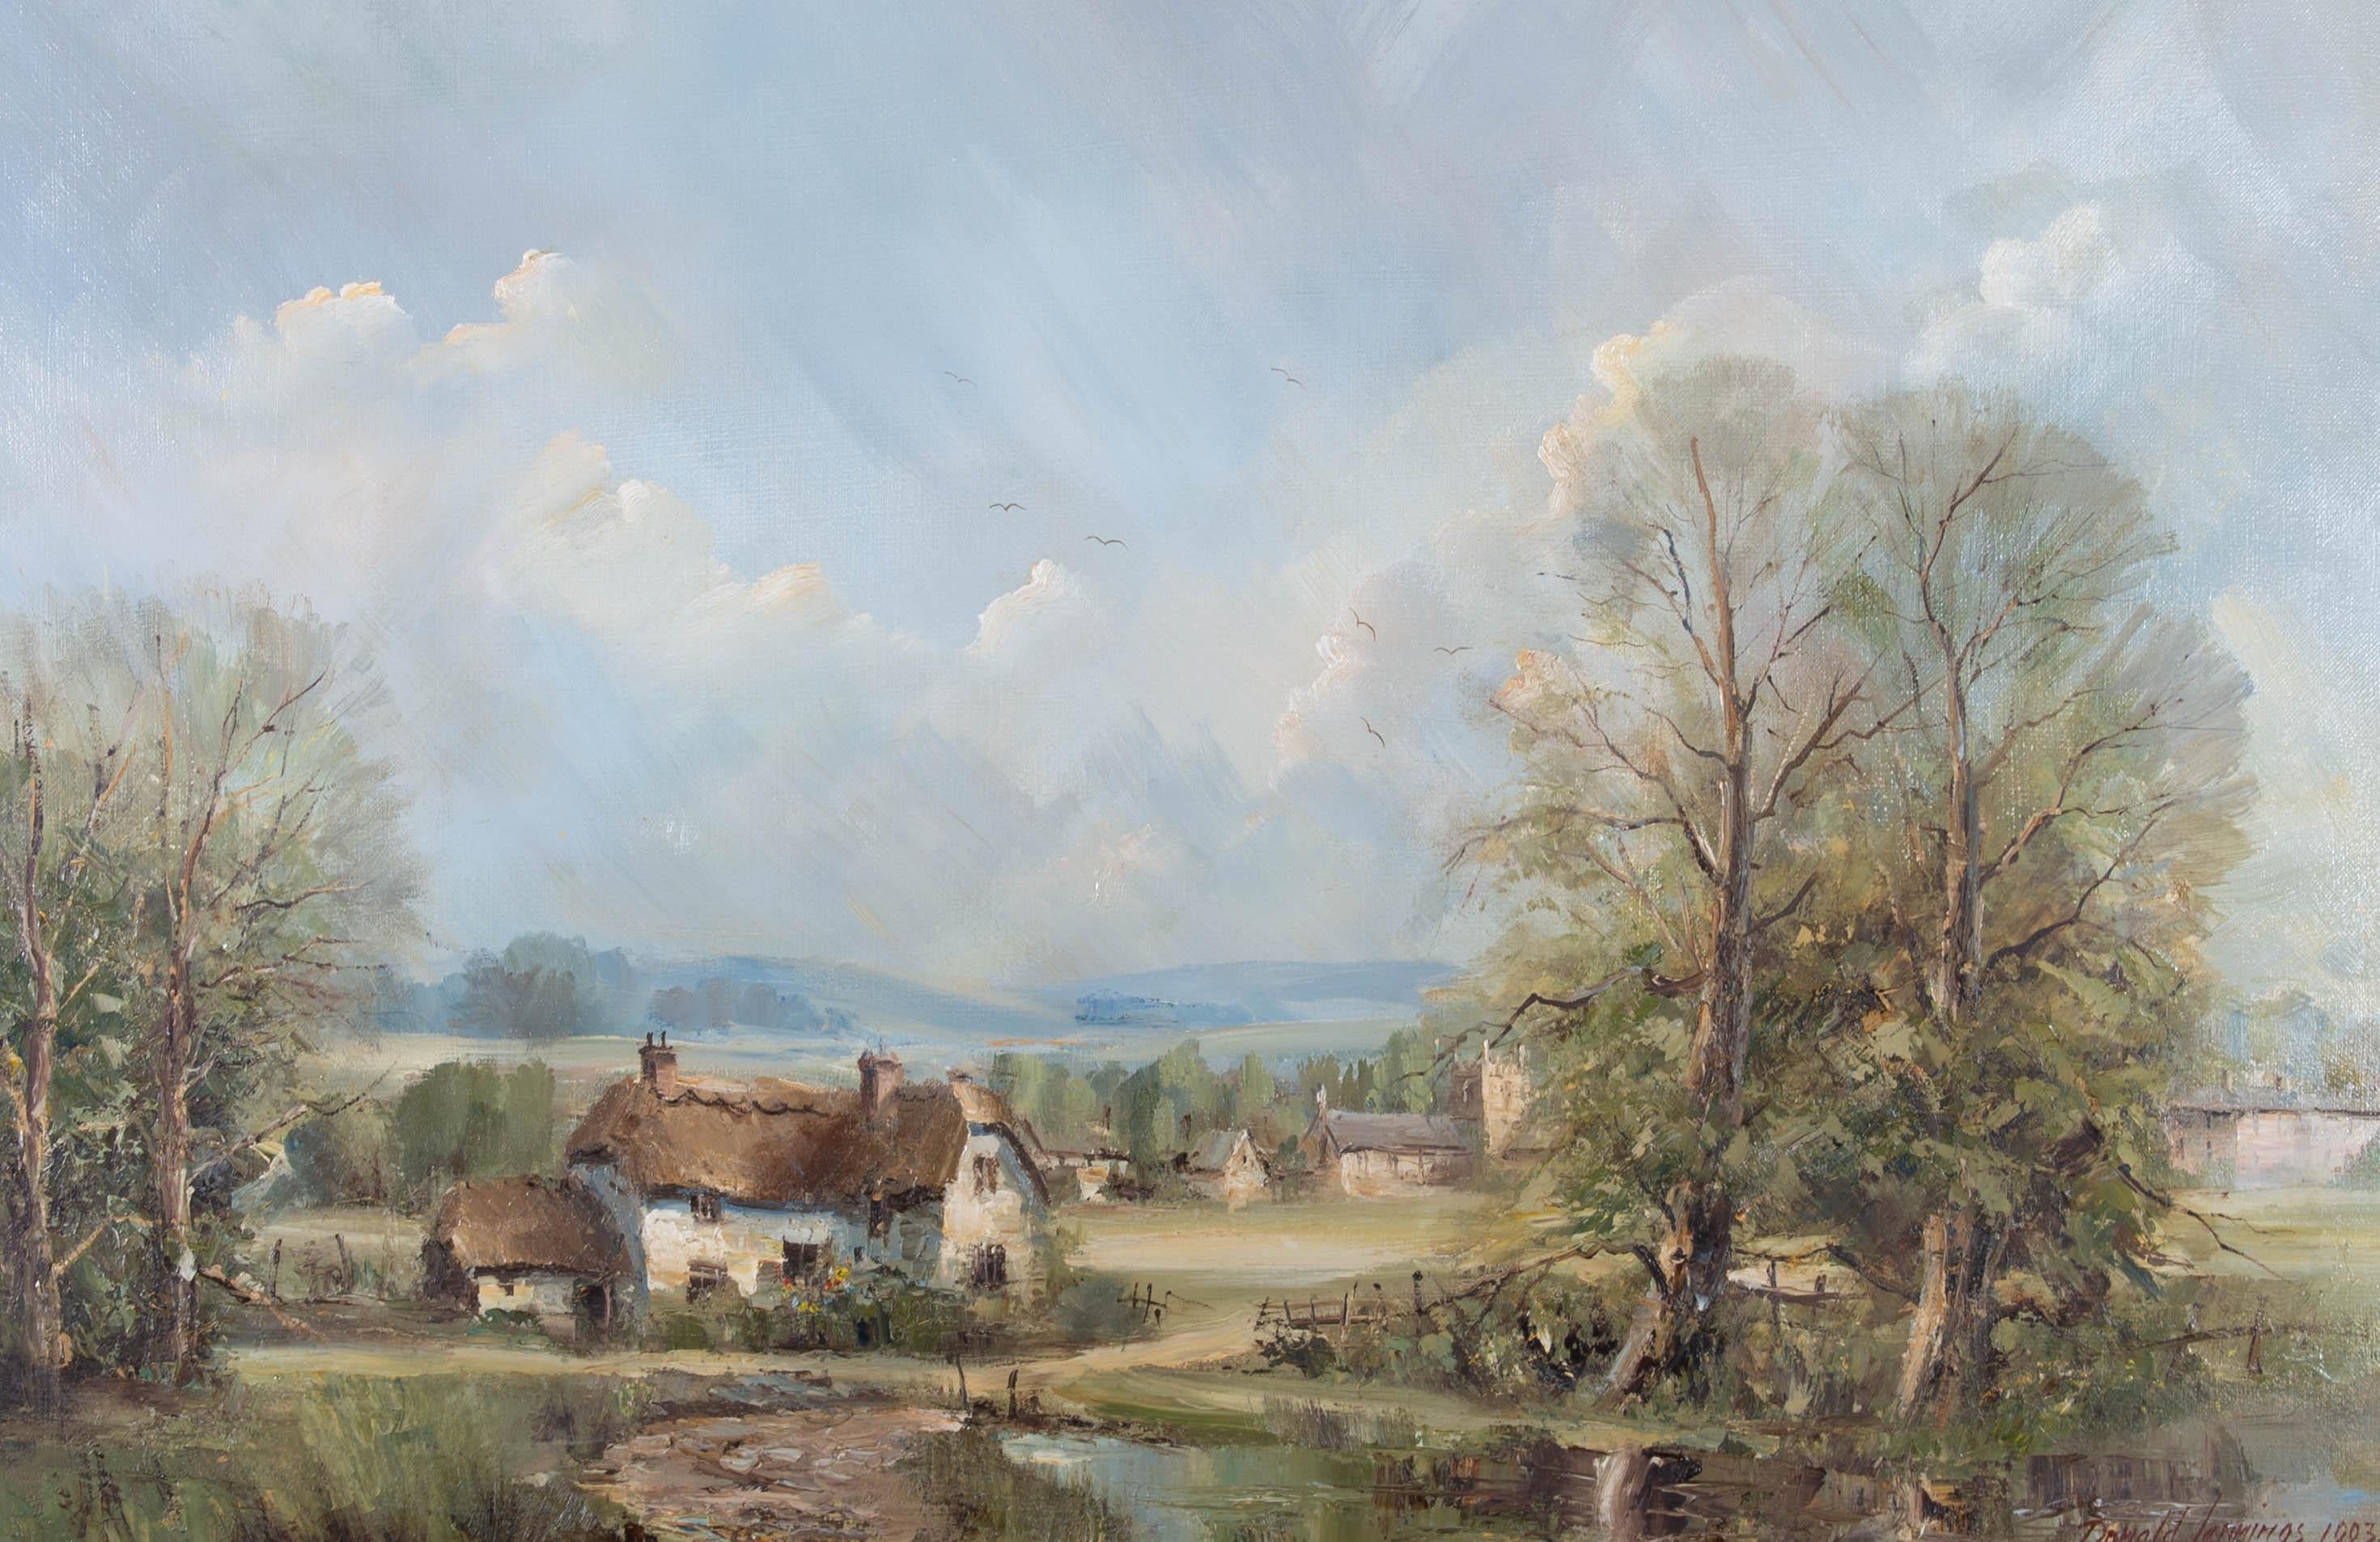 A charming oil painting by Donald Jennings, depicting a rural landscape scene with a cottage and a church in the background. Signed and dated to the lower right-hand corner. Well-presented in a fabric slip with an inner gilt-effect detail, and in an